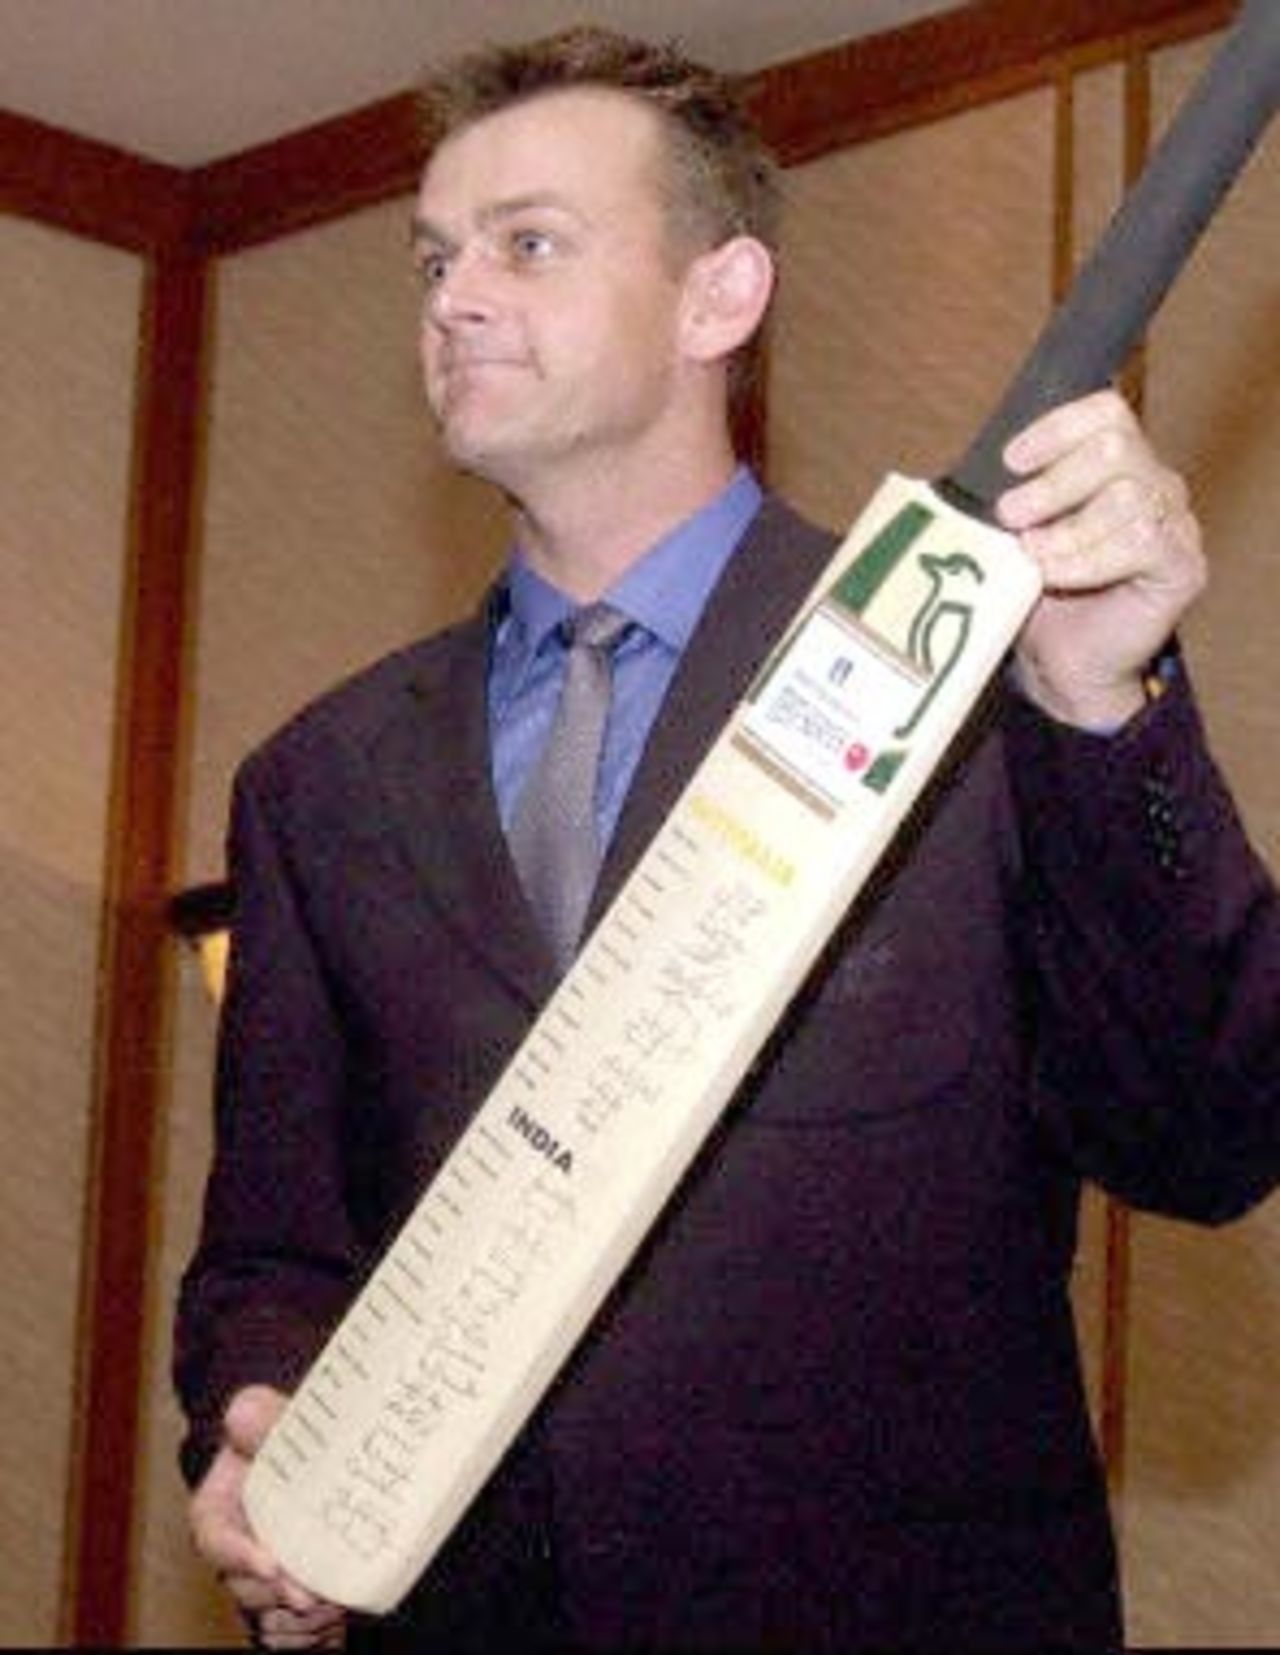 Australian vice-captain Adam Gilcrist shows off the bat autographed by Indian and Australian cricketers during a press conference, 14 February 2001, on arrival at a press conference in Bombay. The bat is to be auctioned during the series of matches to be played across the country and the proceeds will be given to the victims of the earthquake in Gujarat. Australia and India are to play three Test matches and five one day internationals during the current series.